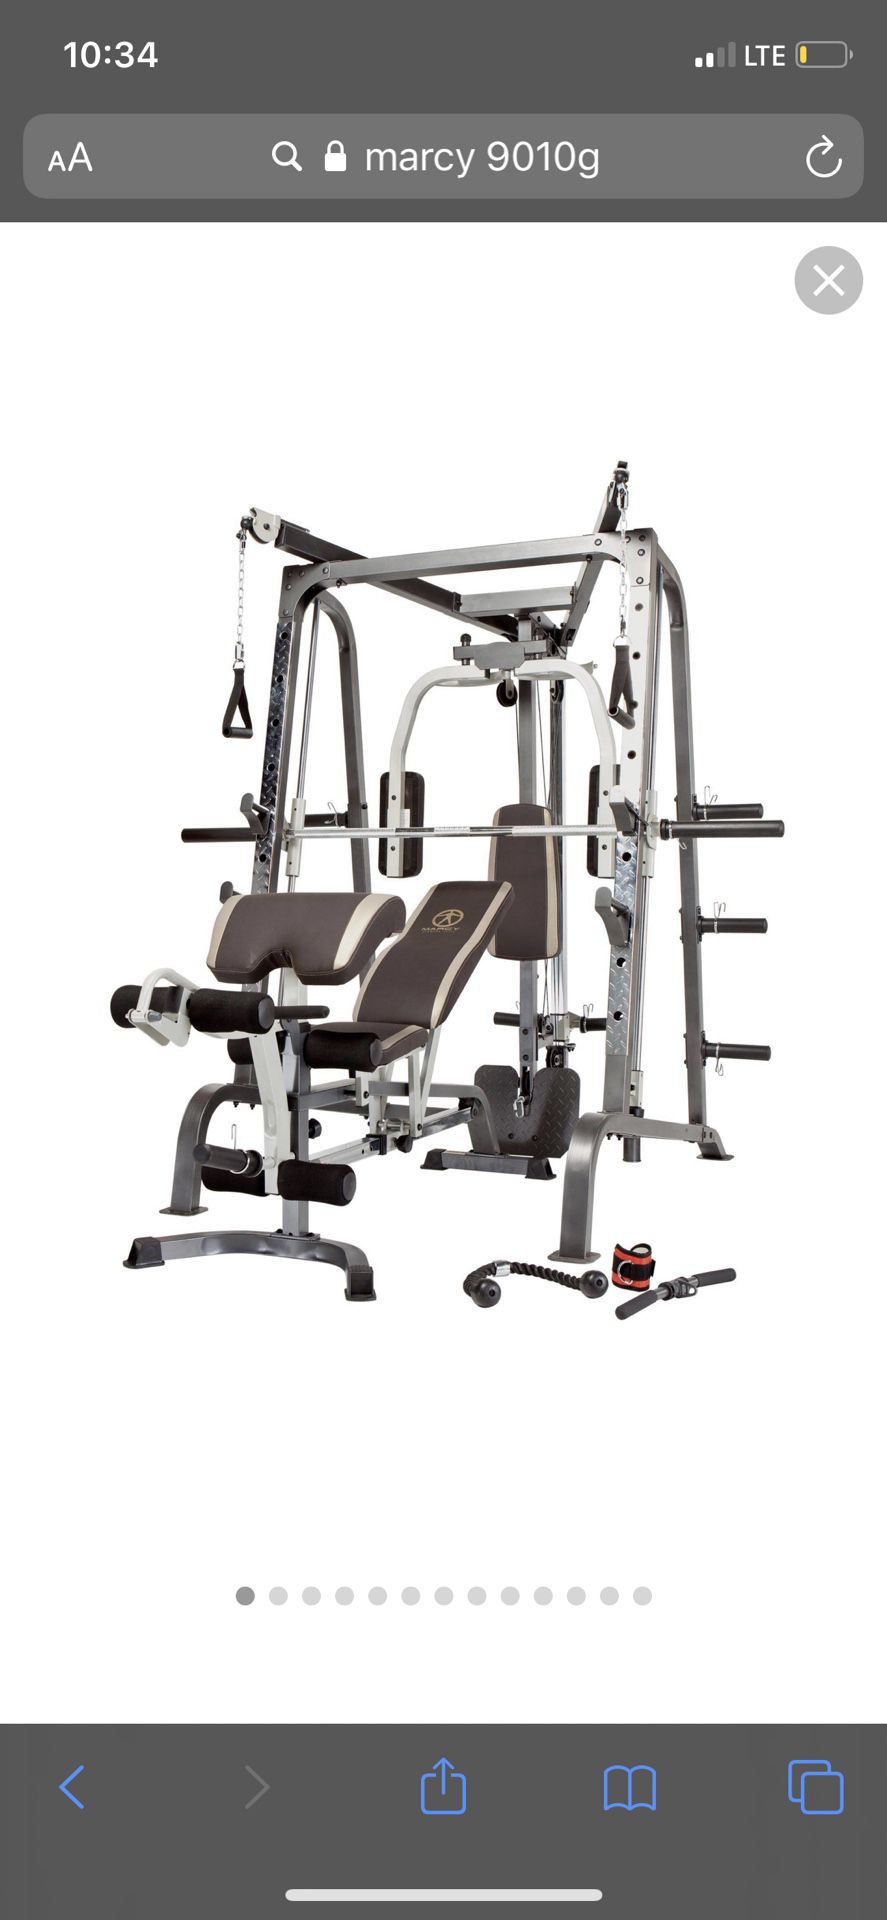 Marcy workout equipment new